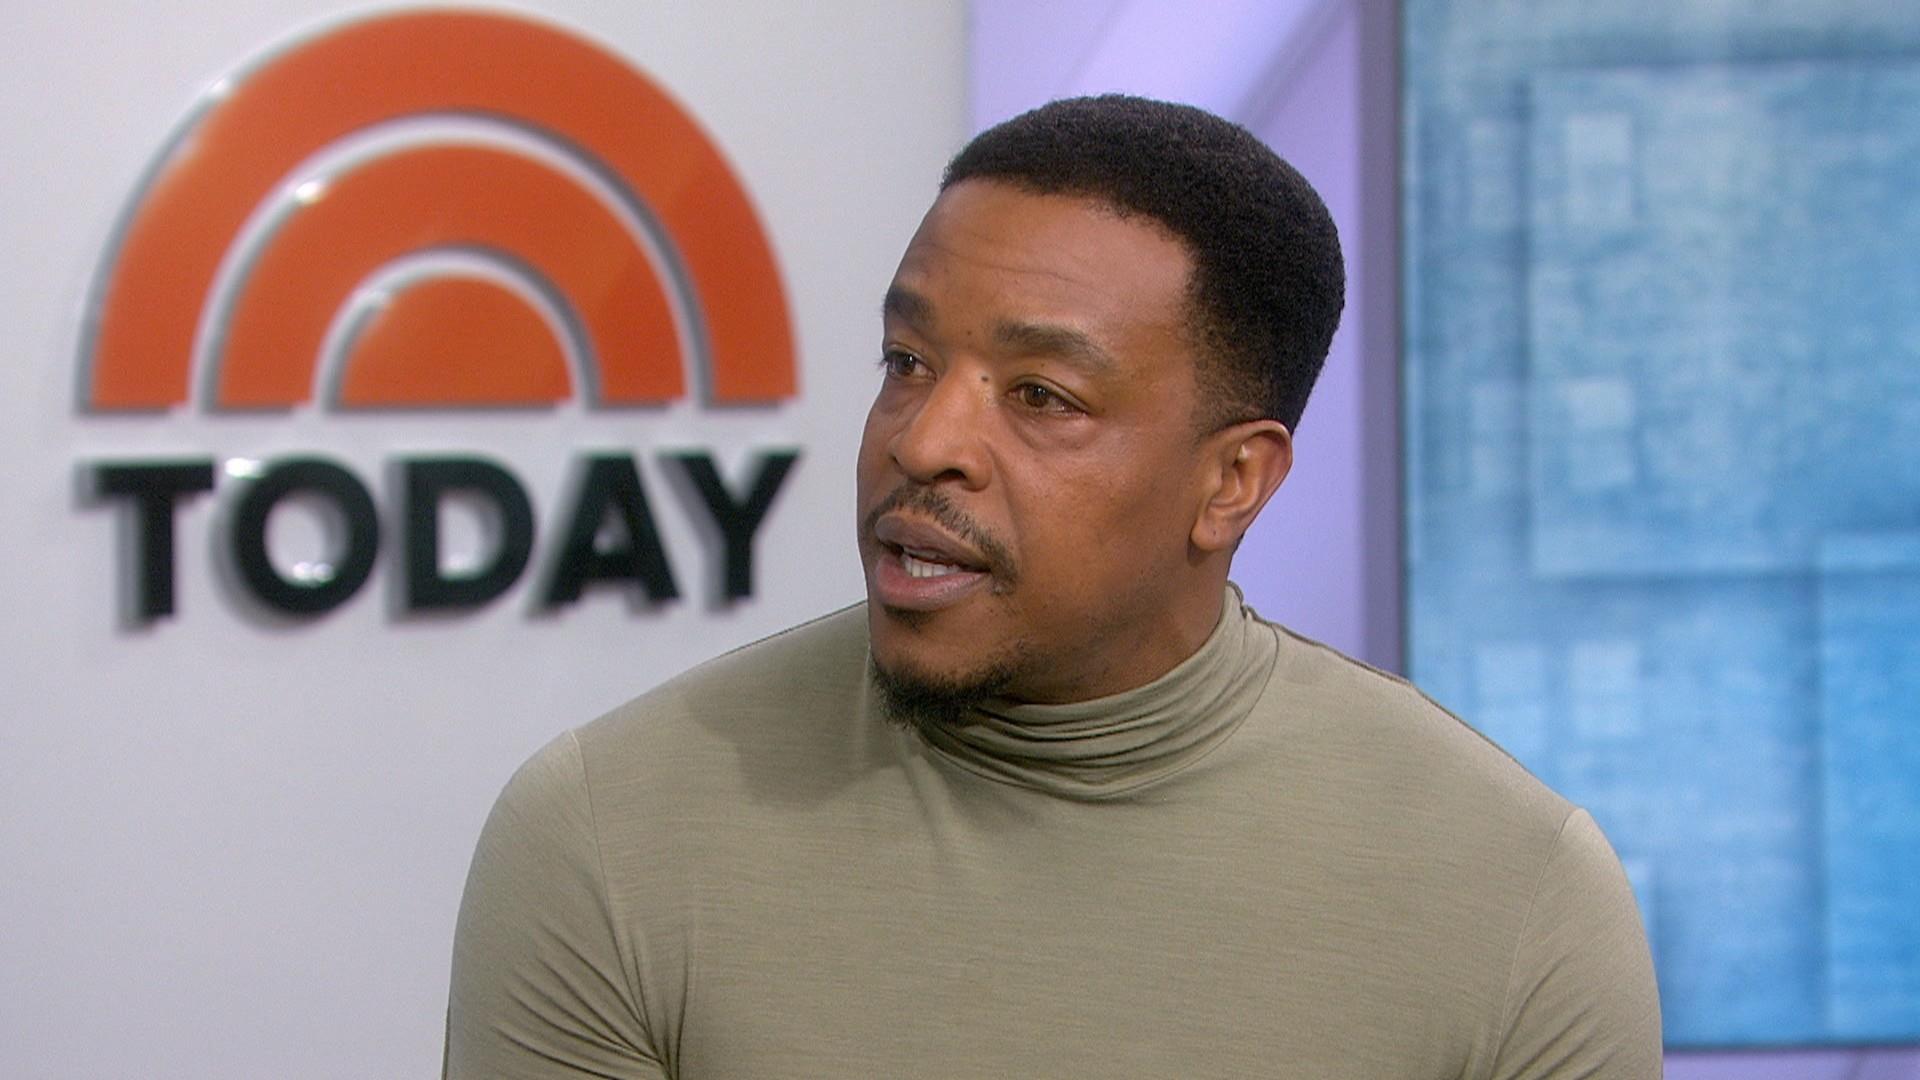 Russell Hornsby On His Breakout Role In The Hate U Give